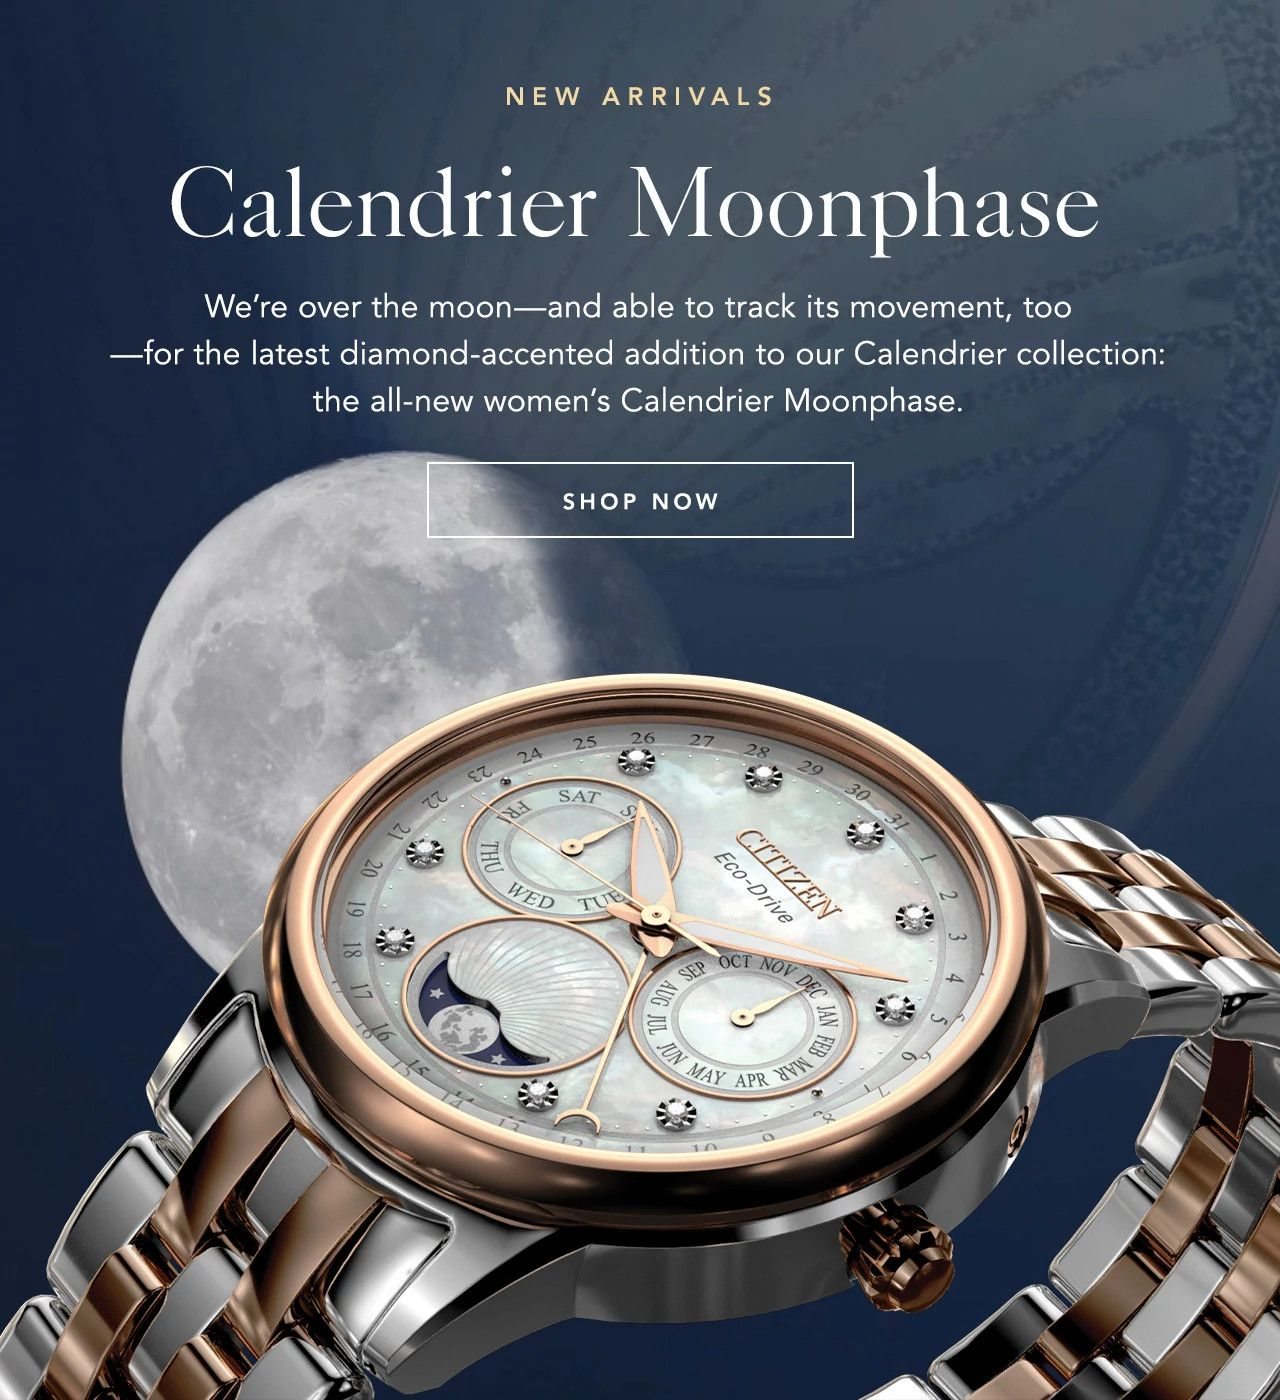 Calendrier Moonphase: We’re over the moon—and able to track its movement, too —for the latest diamond-accented addition to our Calendrier collection: the all-new women’s Calendrier Moonphase. 